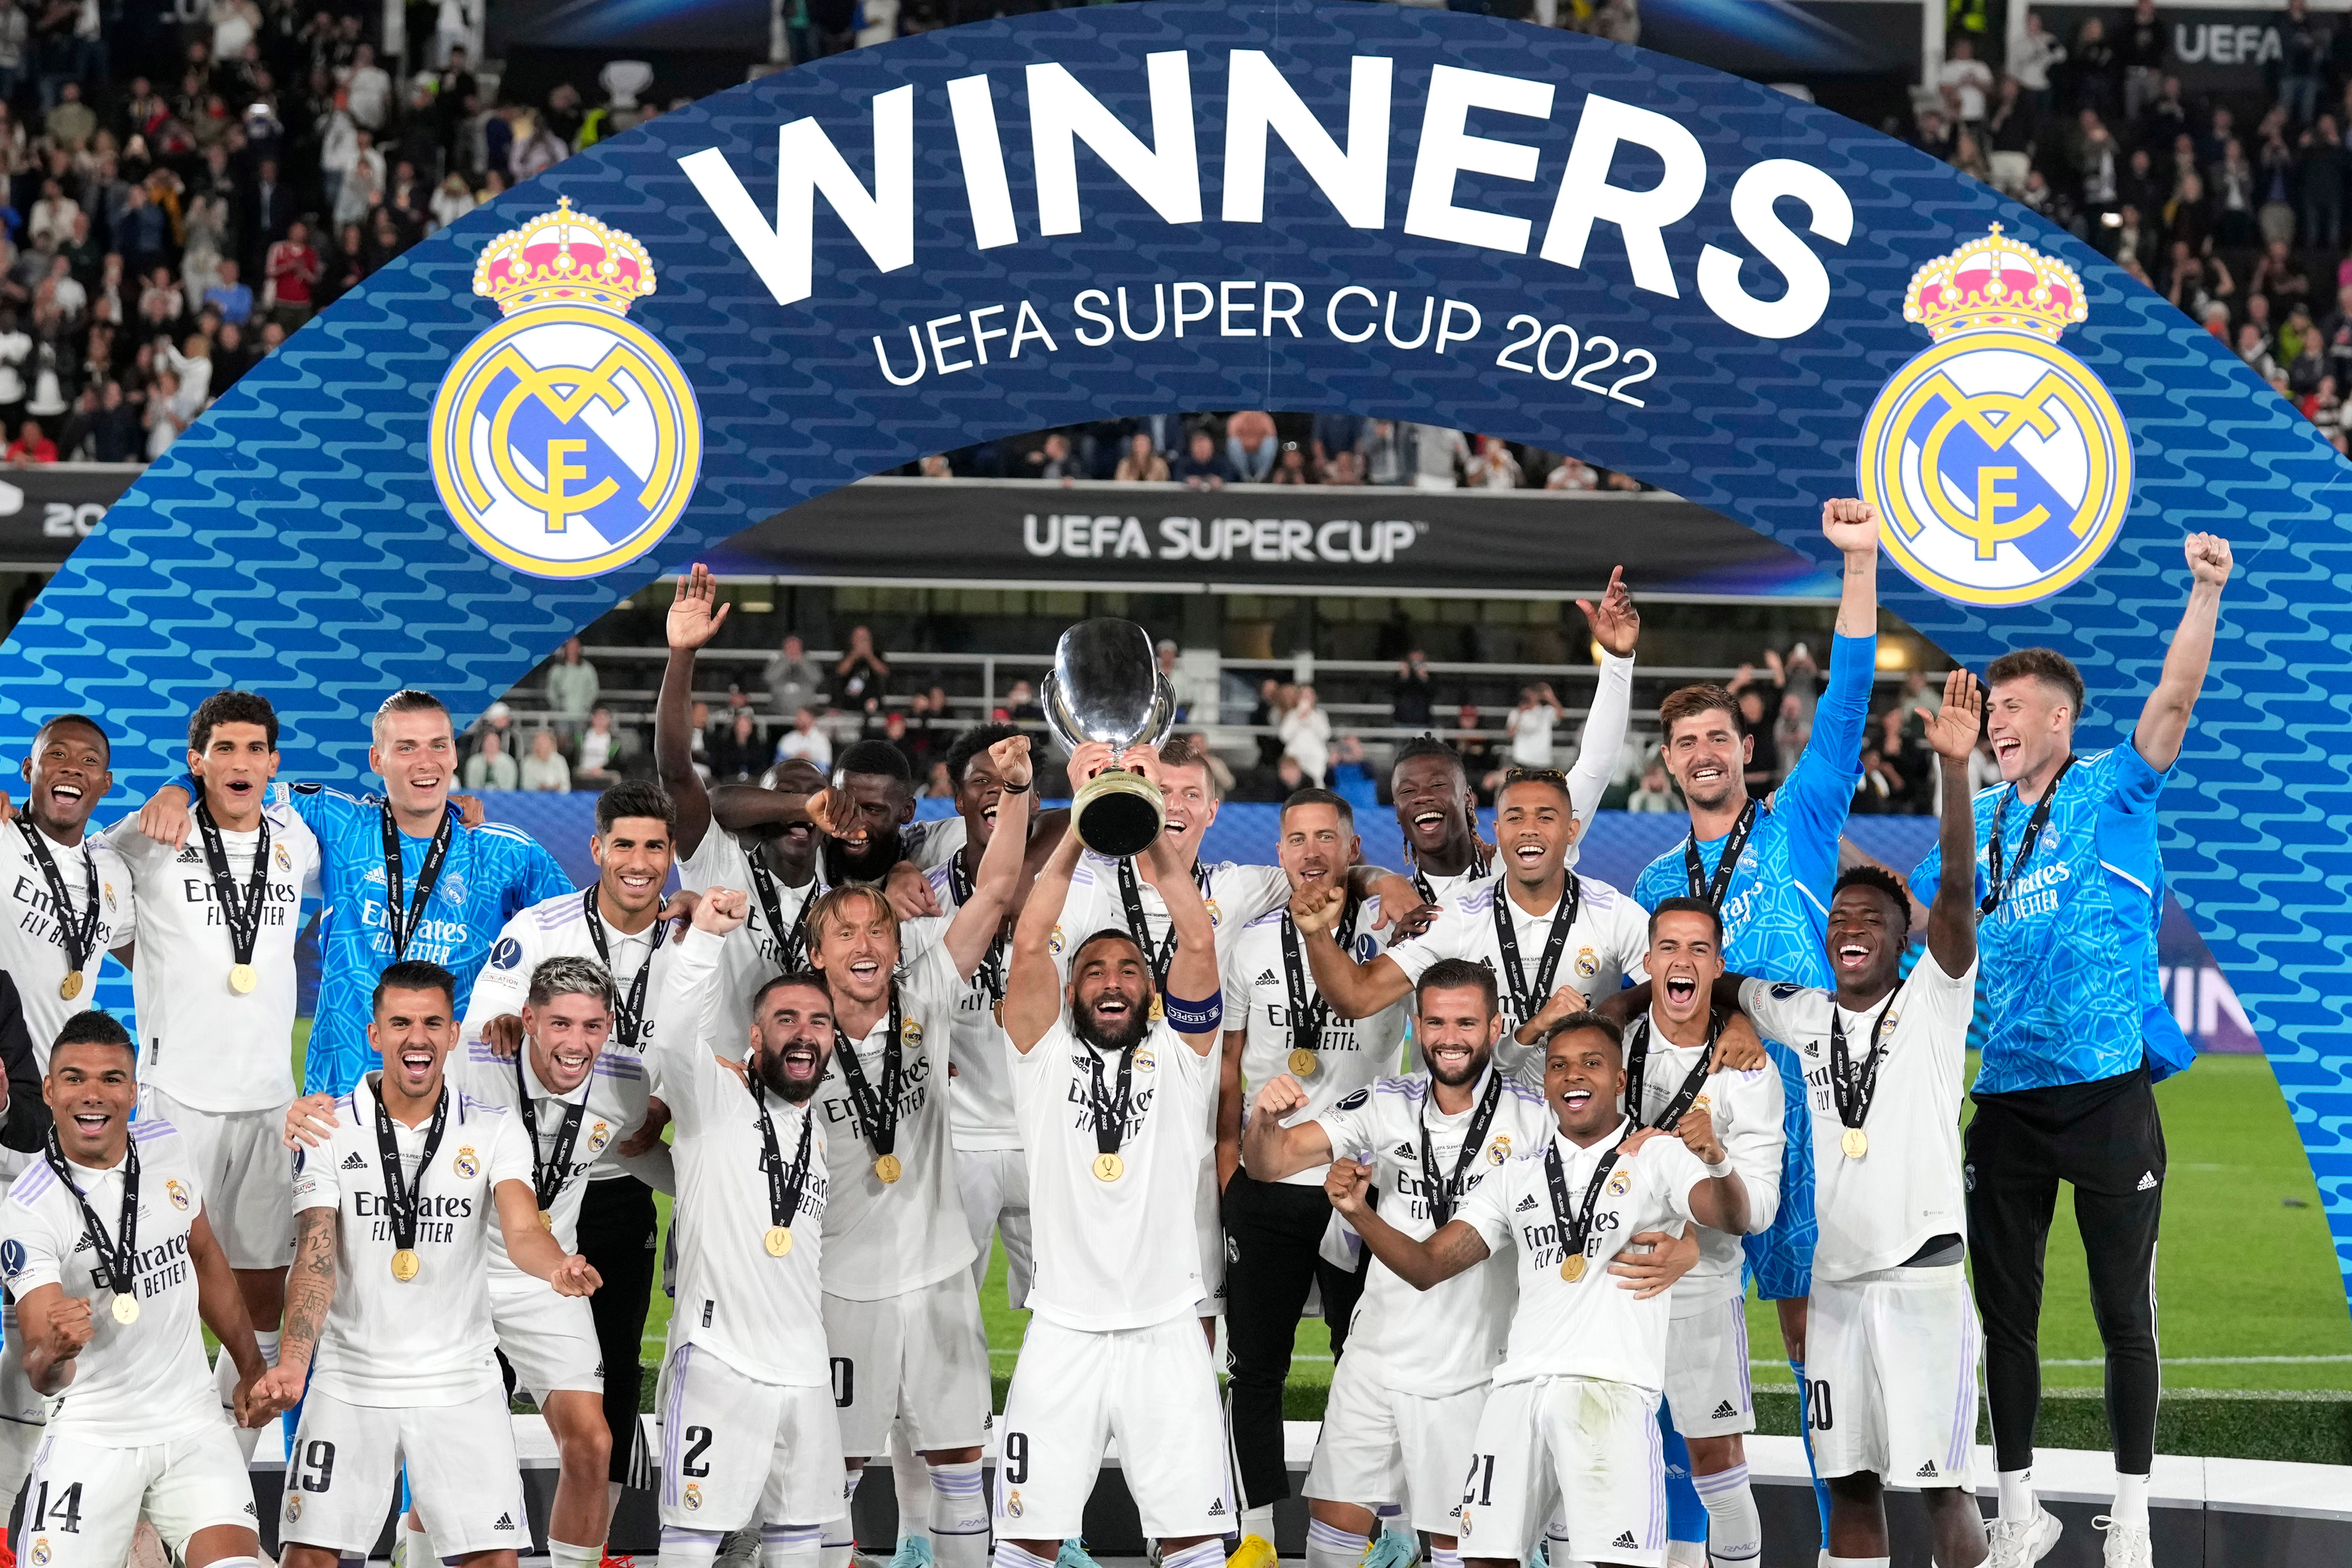 Real Madrid are current Super Cup holders